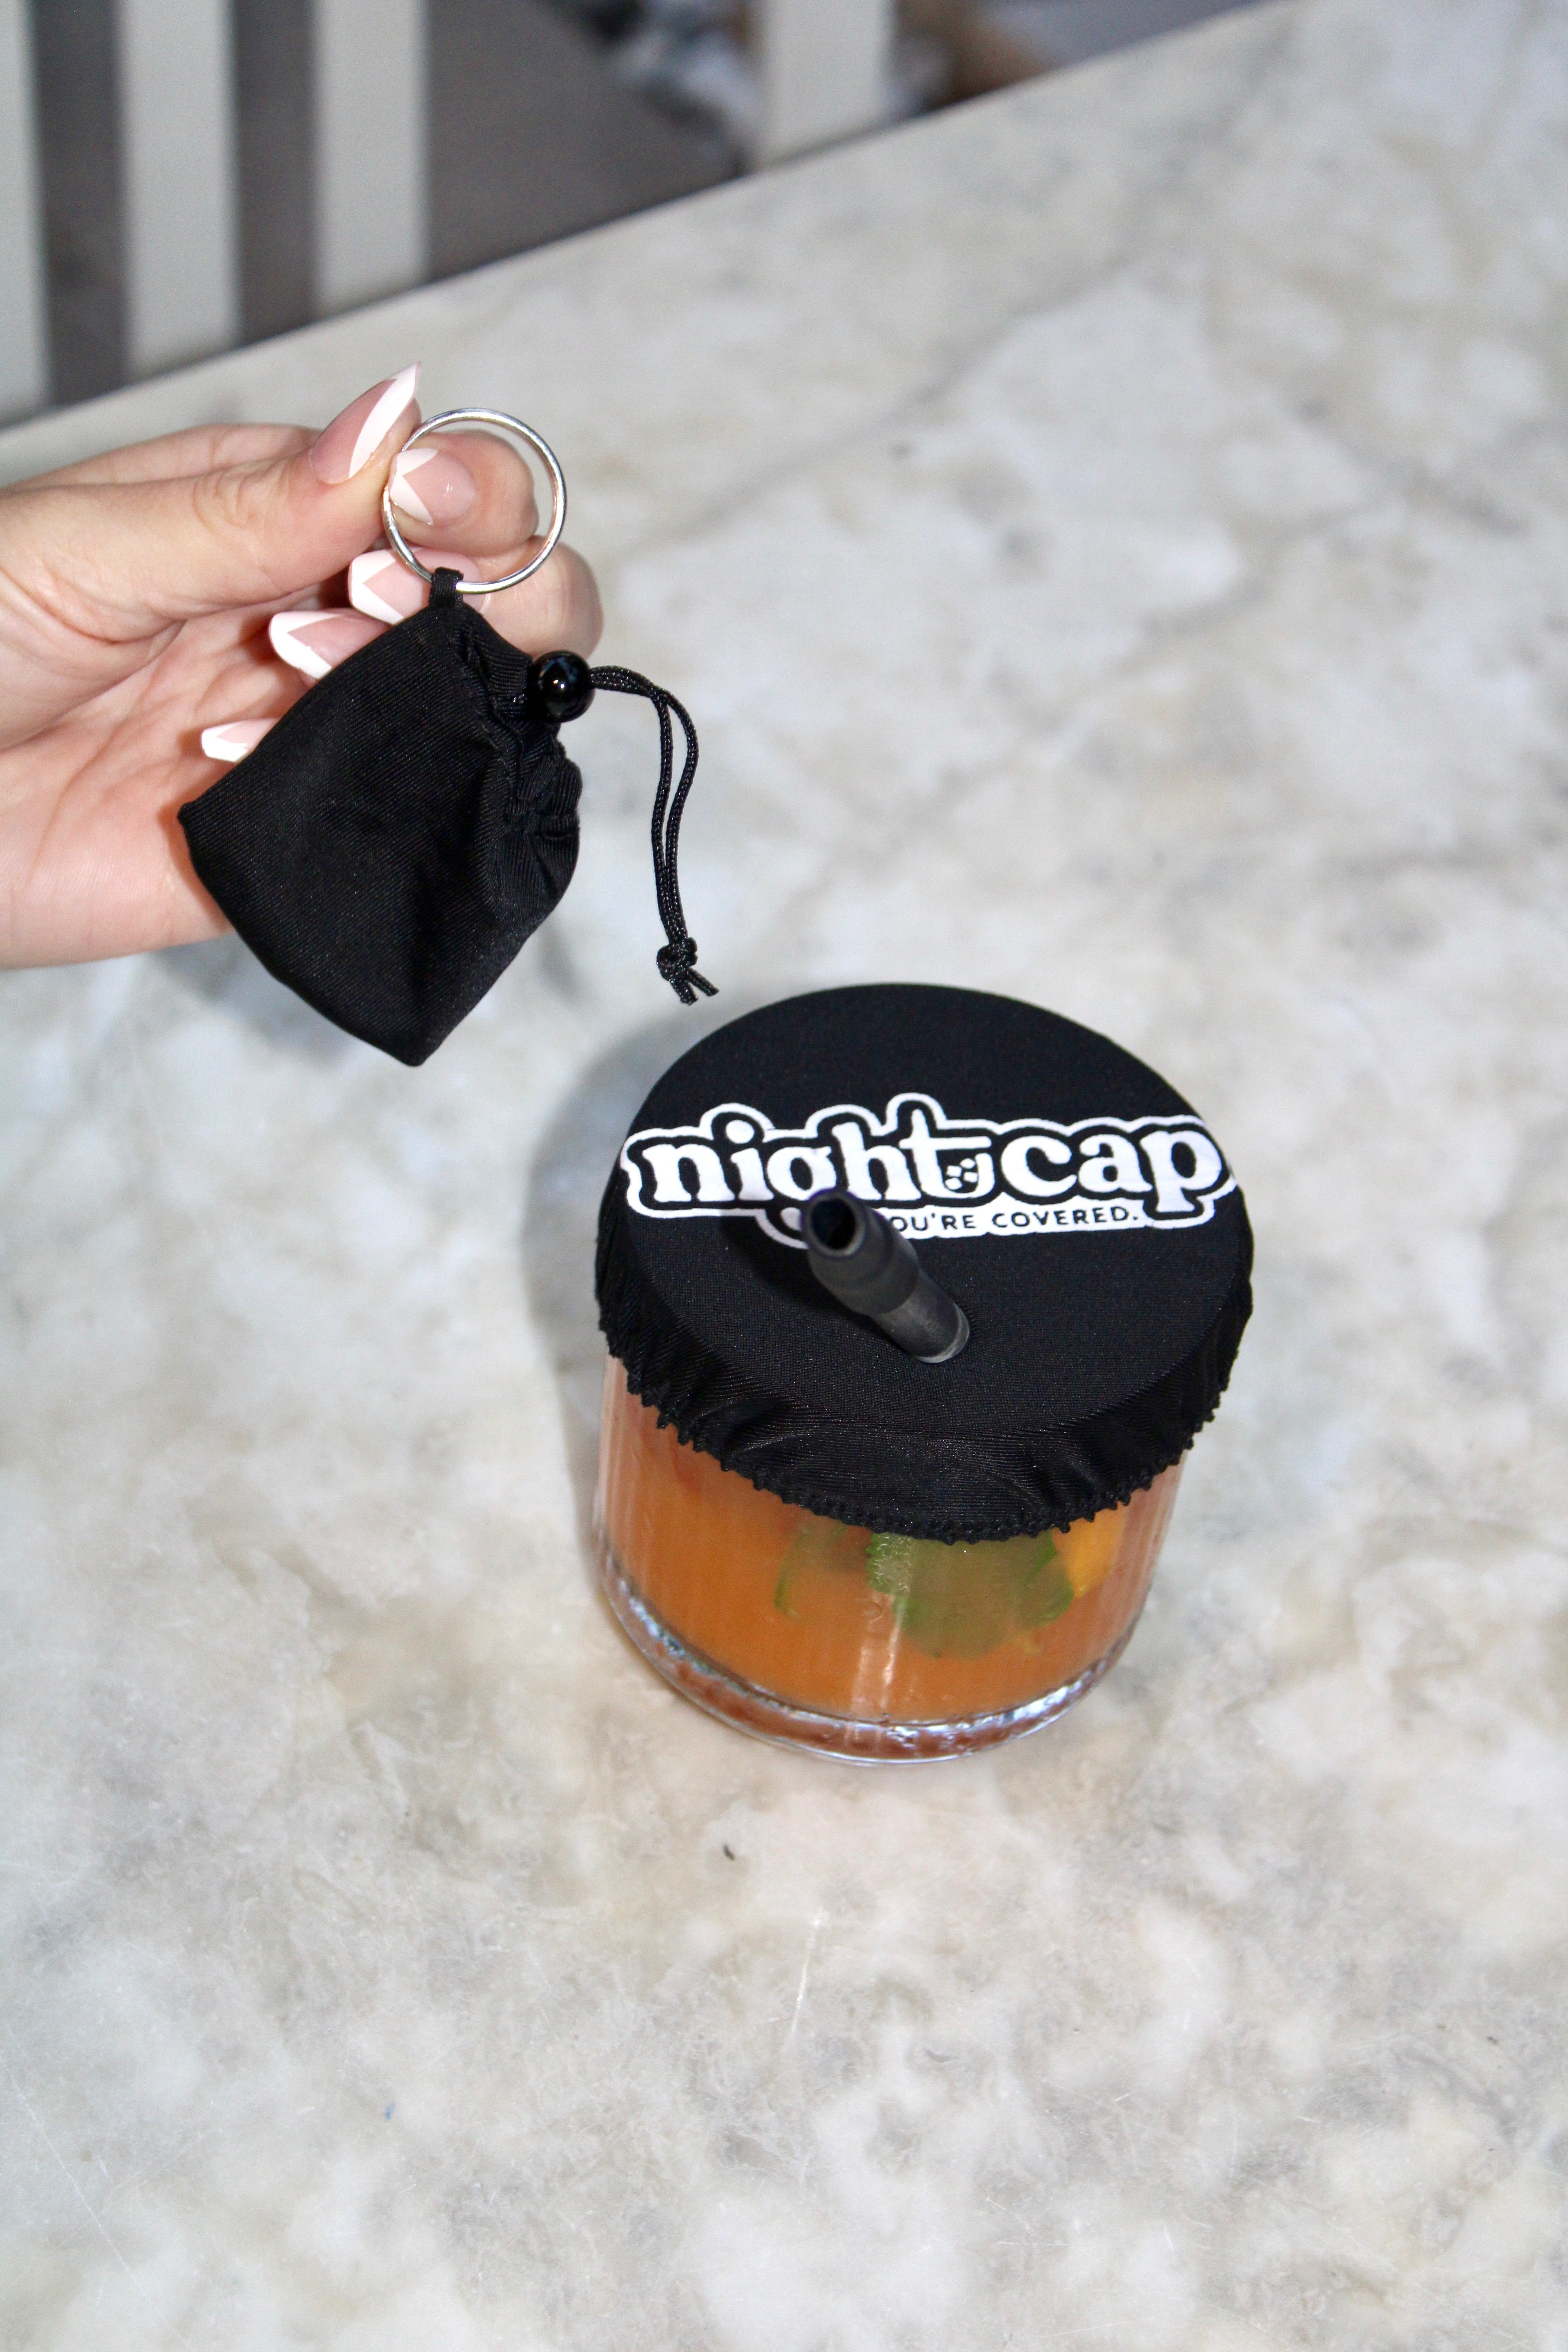 NightCap Bottle Tops (With Pouch) – NightCapIt